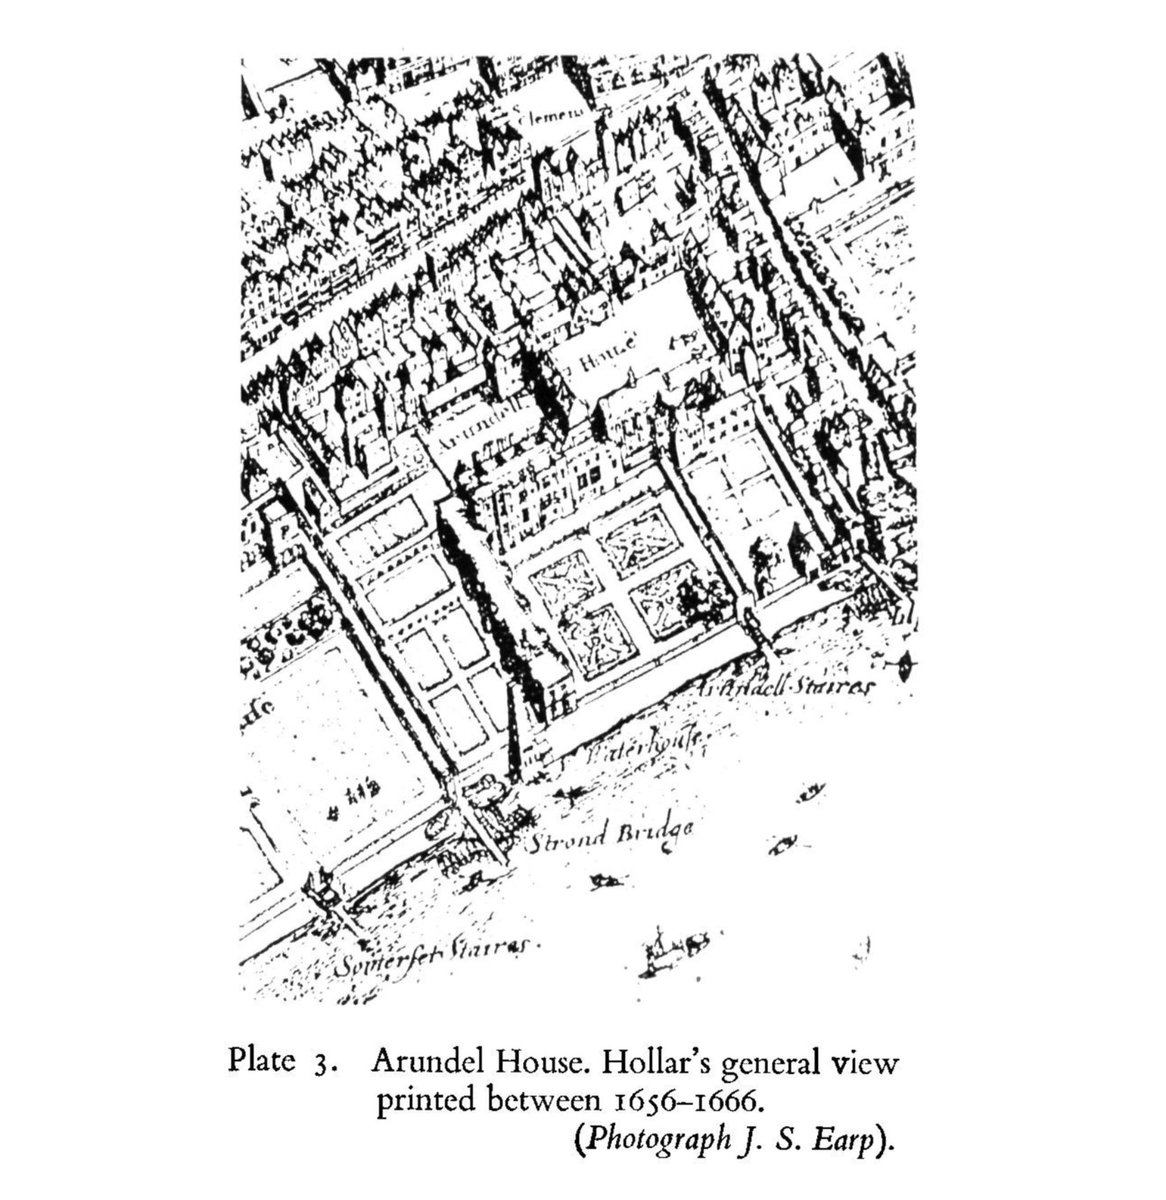 The "Arundel Statues" shown by the Thames in the gardens of Arundel House on an engraved map of London by Wenceslaus Hollar (1650s-1660s).